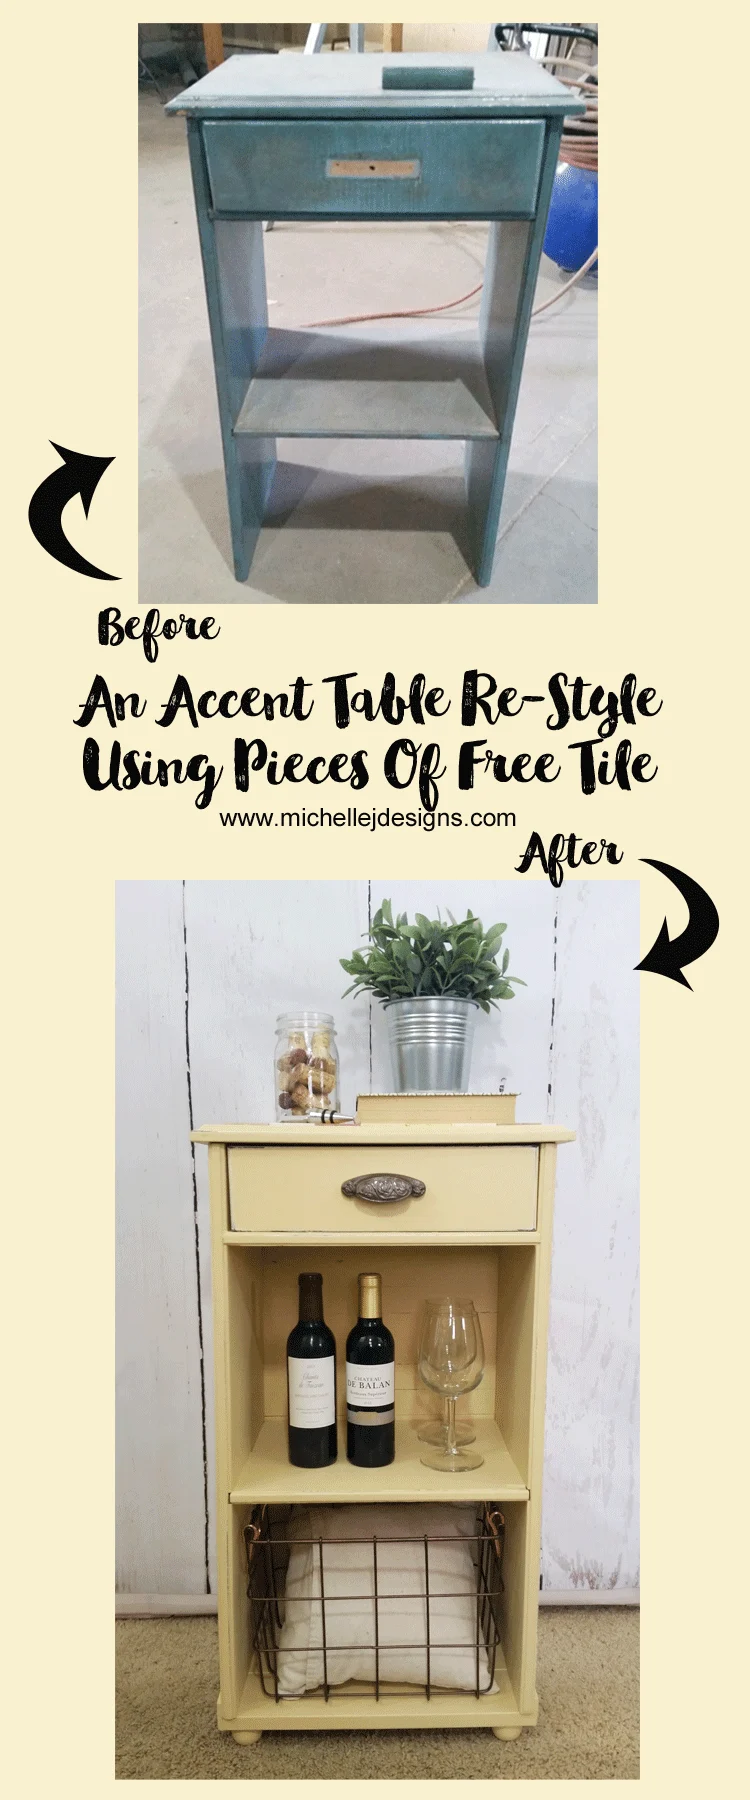 This little rickety accent table was transformed and re-styled using pieces of free tile samples. 